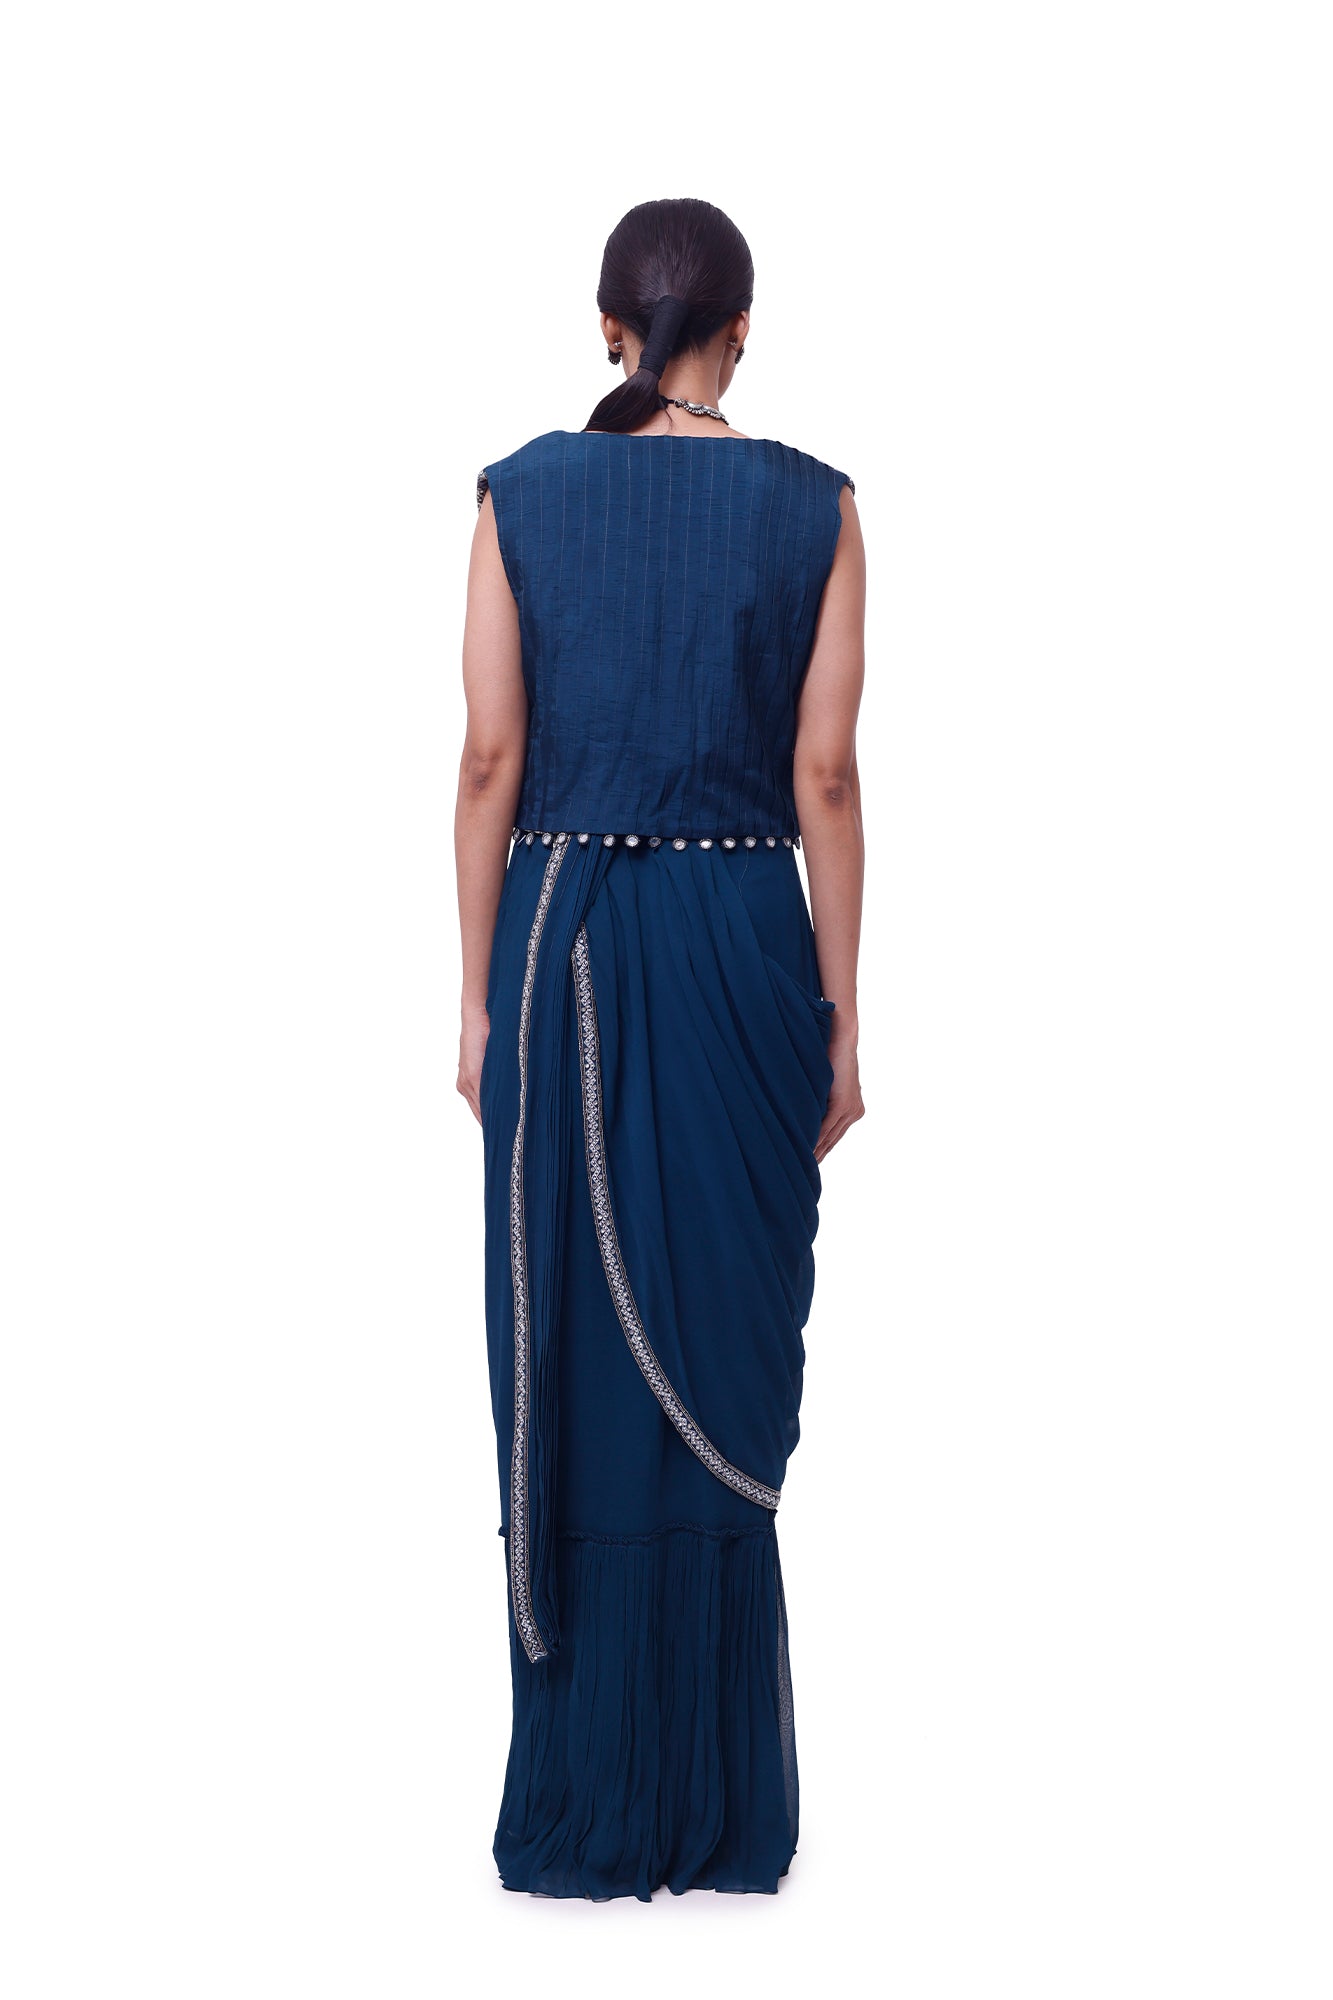 Shop navy blue embroidered georgette drape saree online in USA with jacket. Look your best at parties and weddings in beautiful designer sarees, embroidered sarees, handwoven sarees, silk sarees, organza saris from Pure Elegance Indian saree store in USA.-back